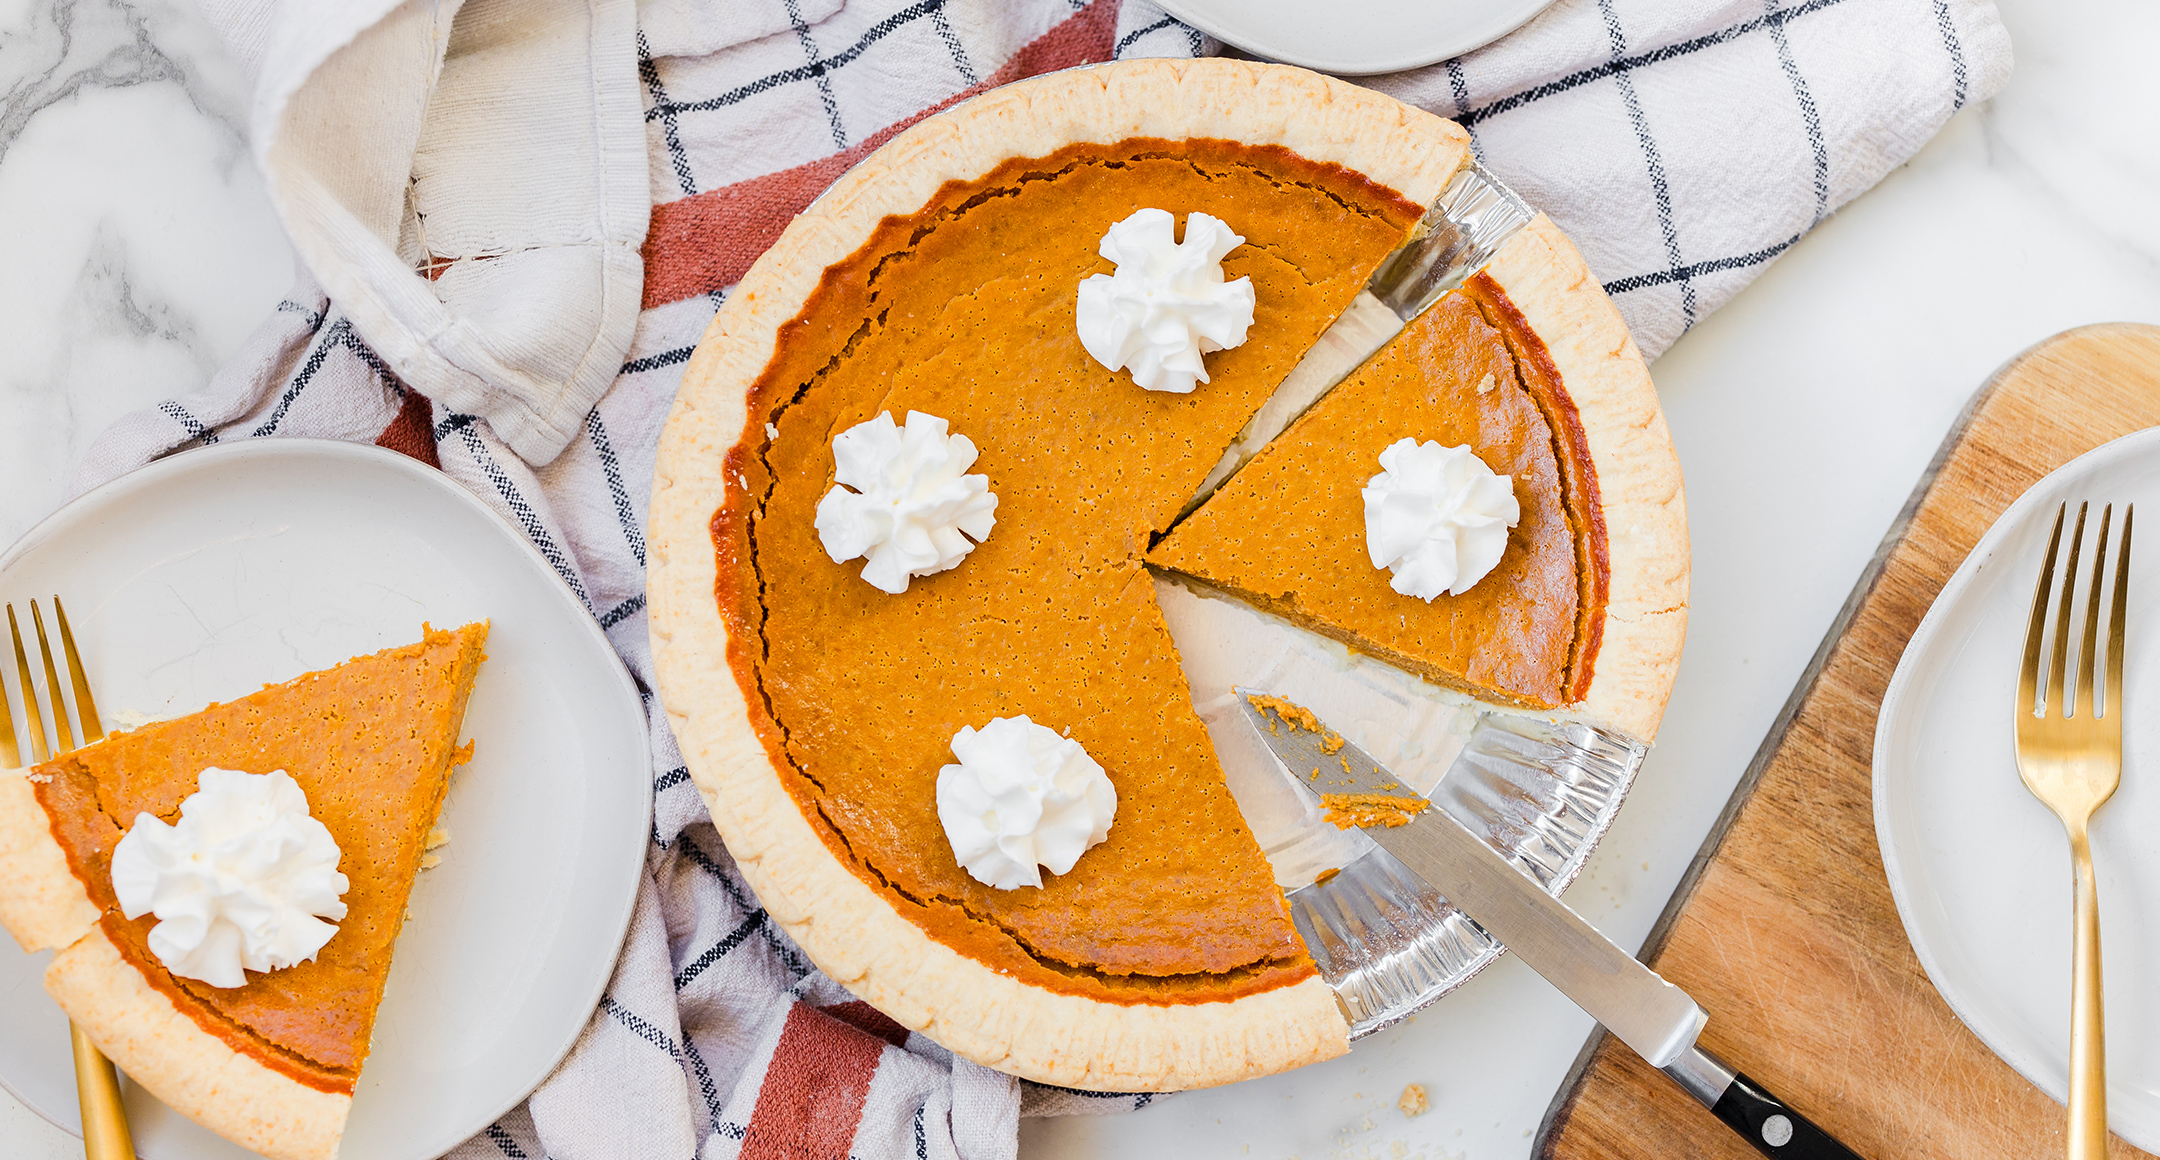 A freshly baked pumpkin pie topped with whipped cream and sliced with one piece removed and placed on a plate next to it.